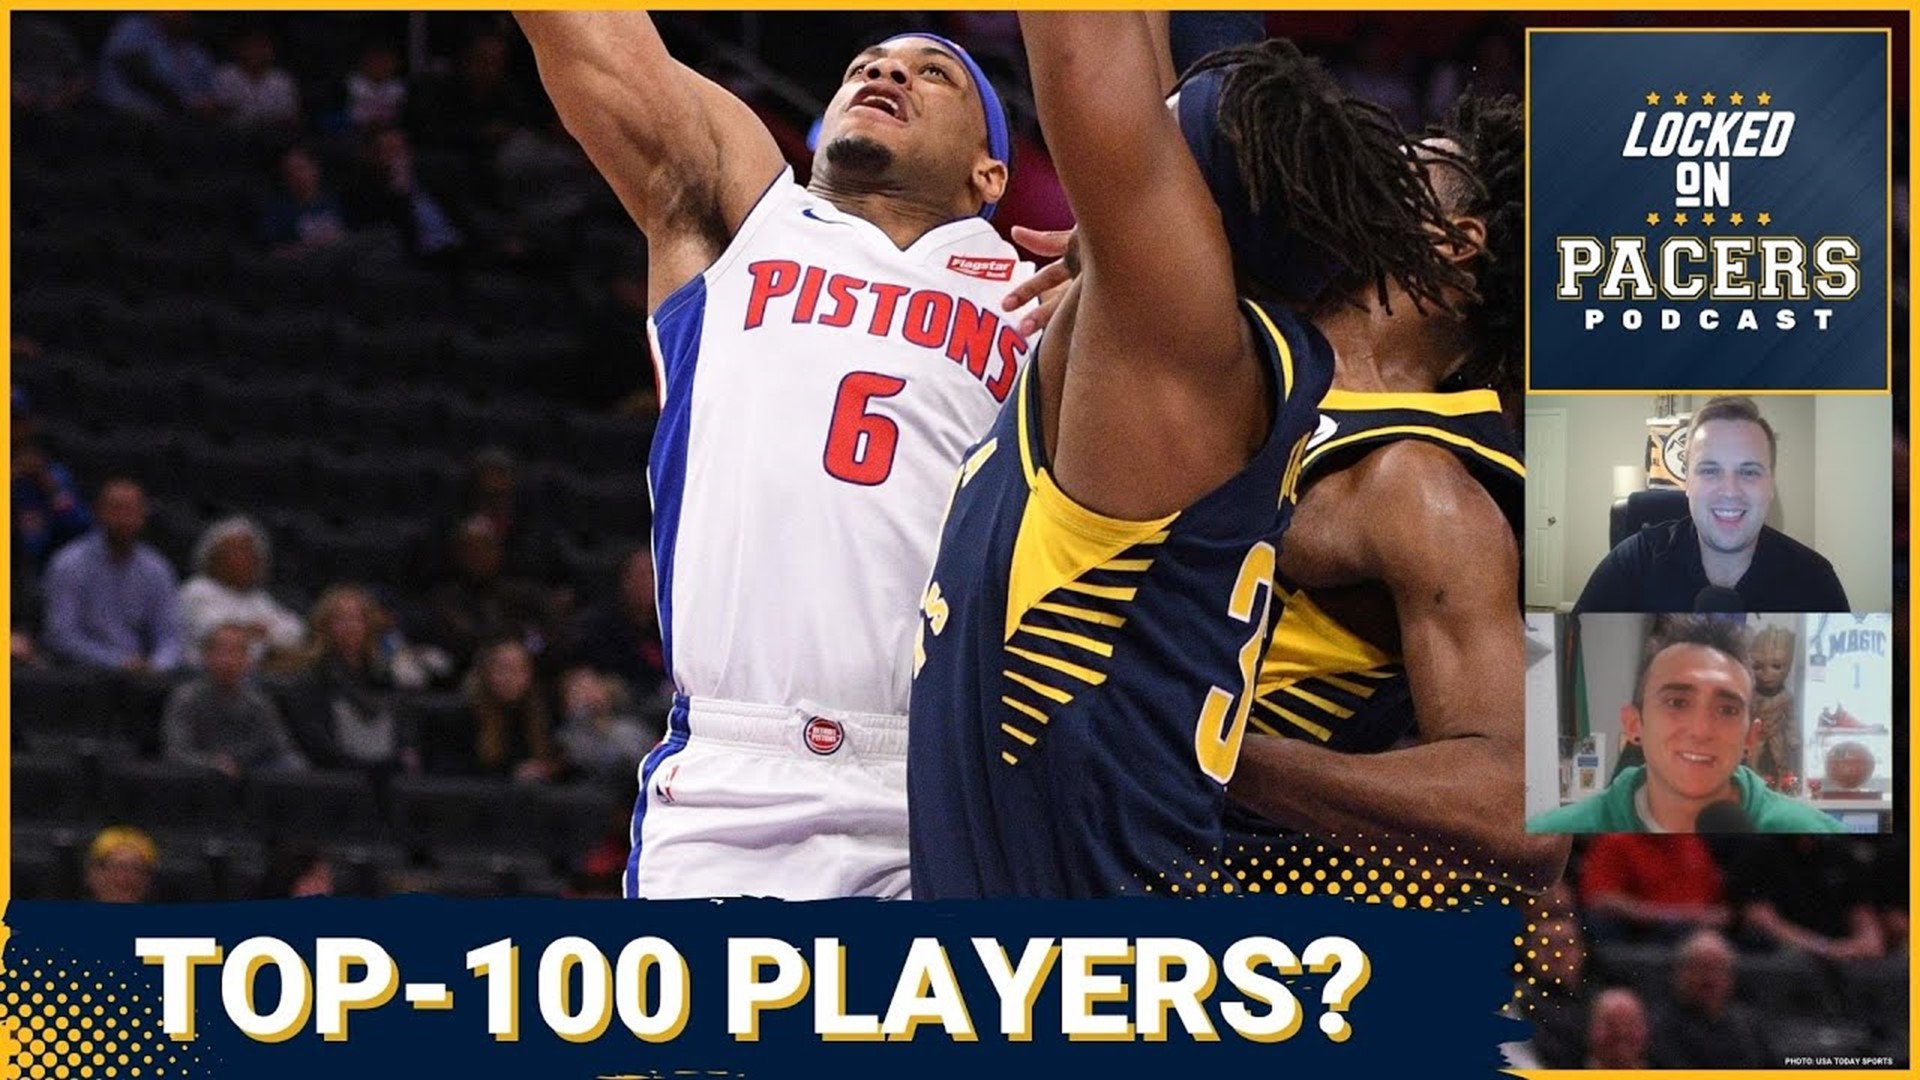 How many of the top 100 players in the NBA are on the Indiana Pacers?